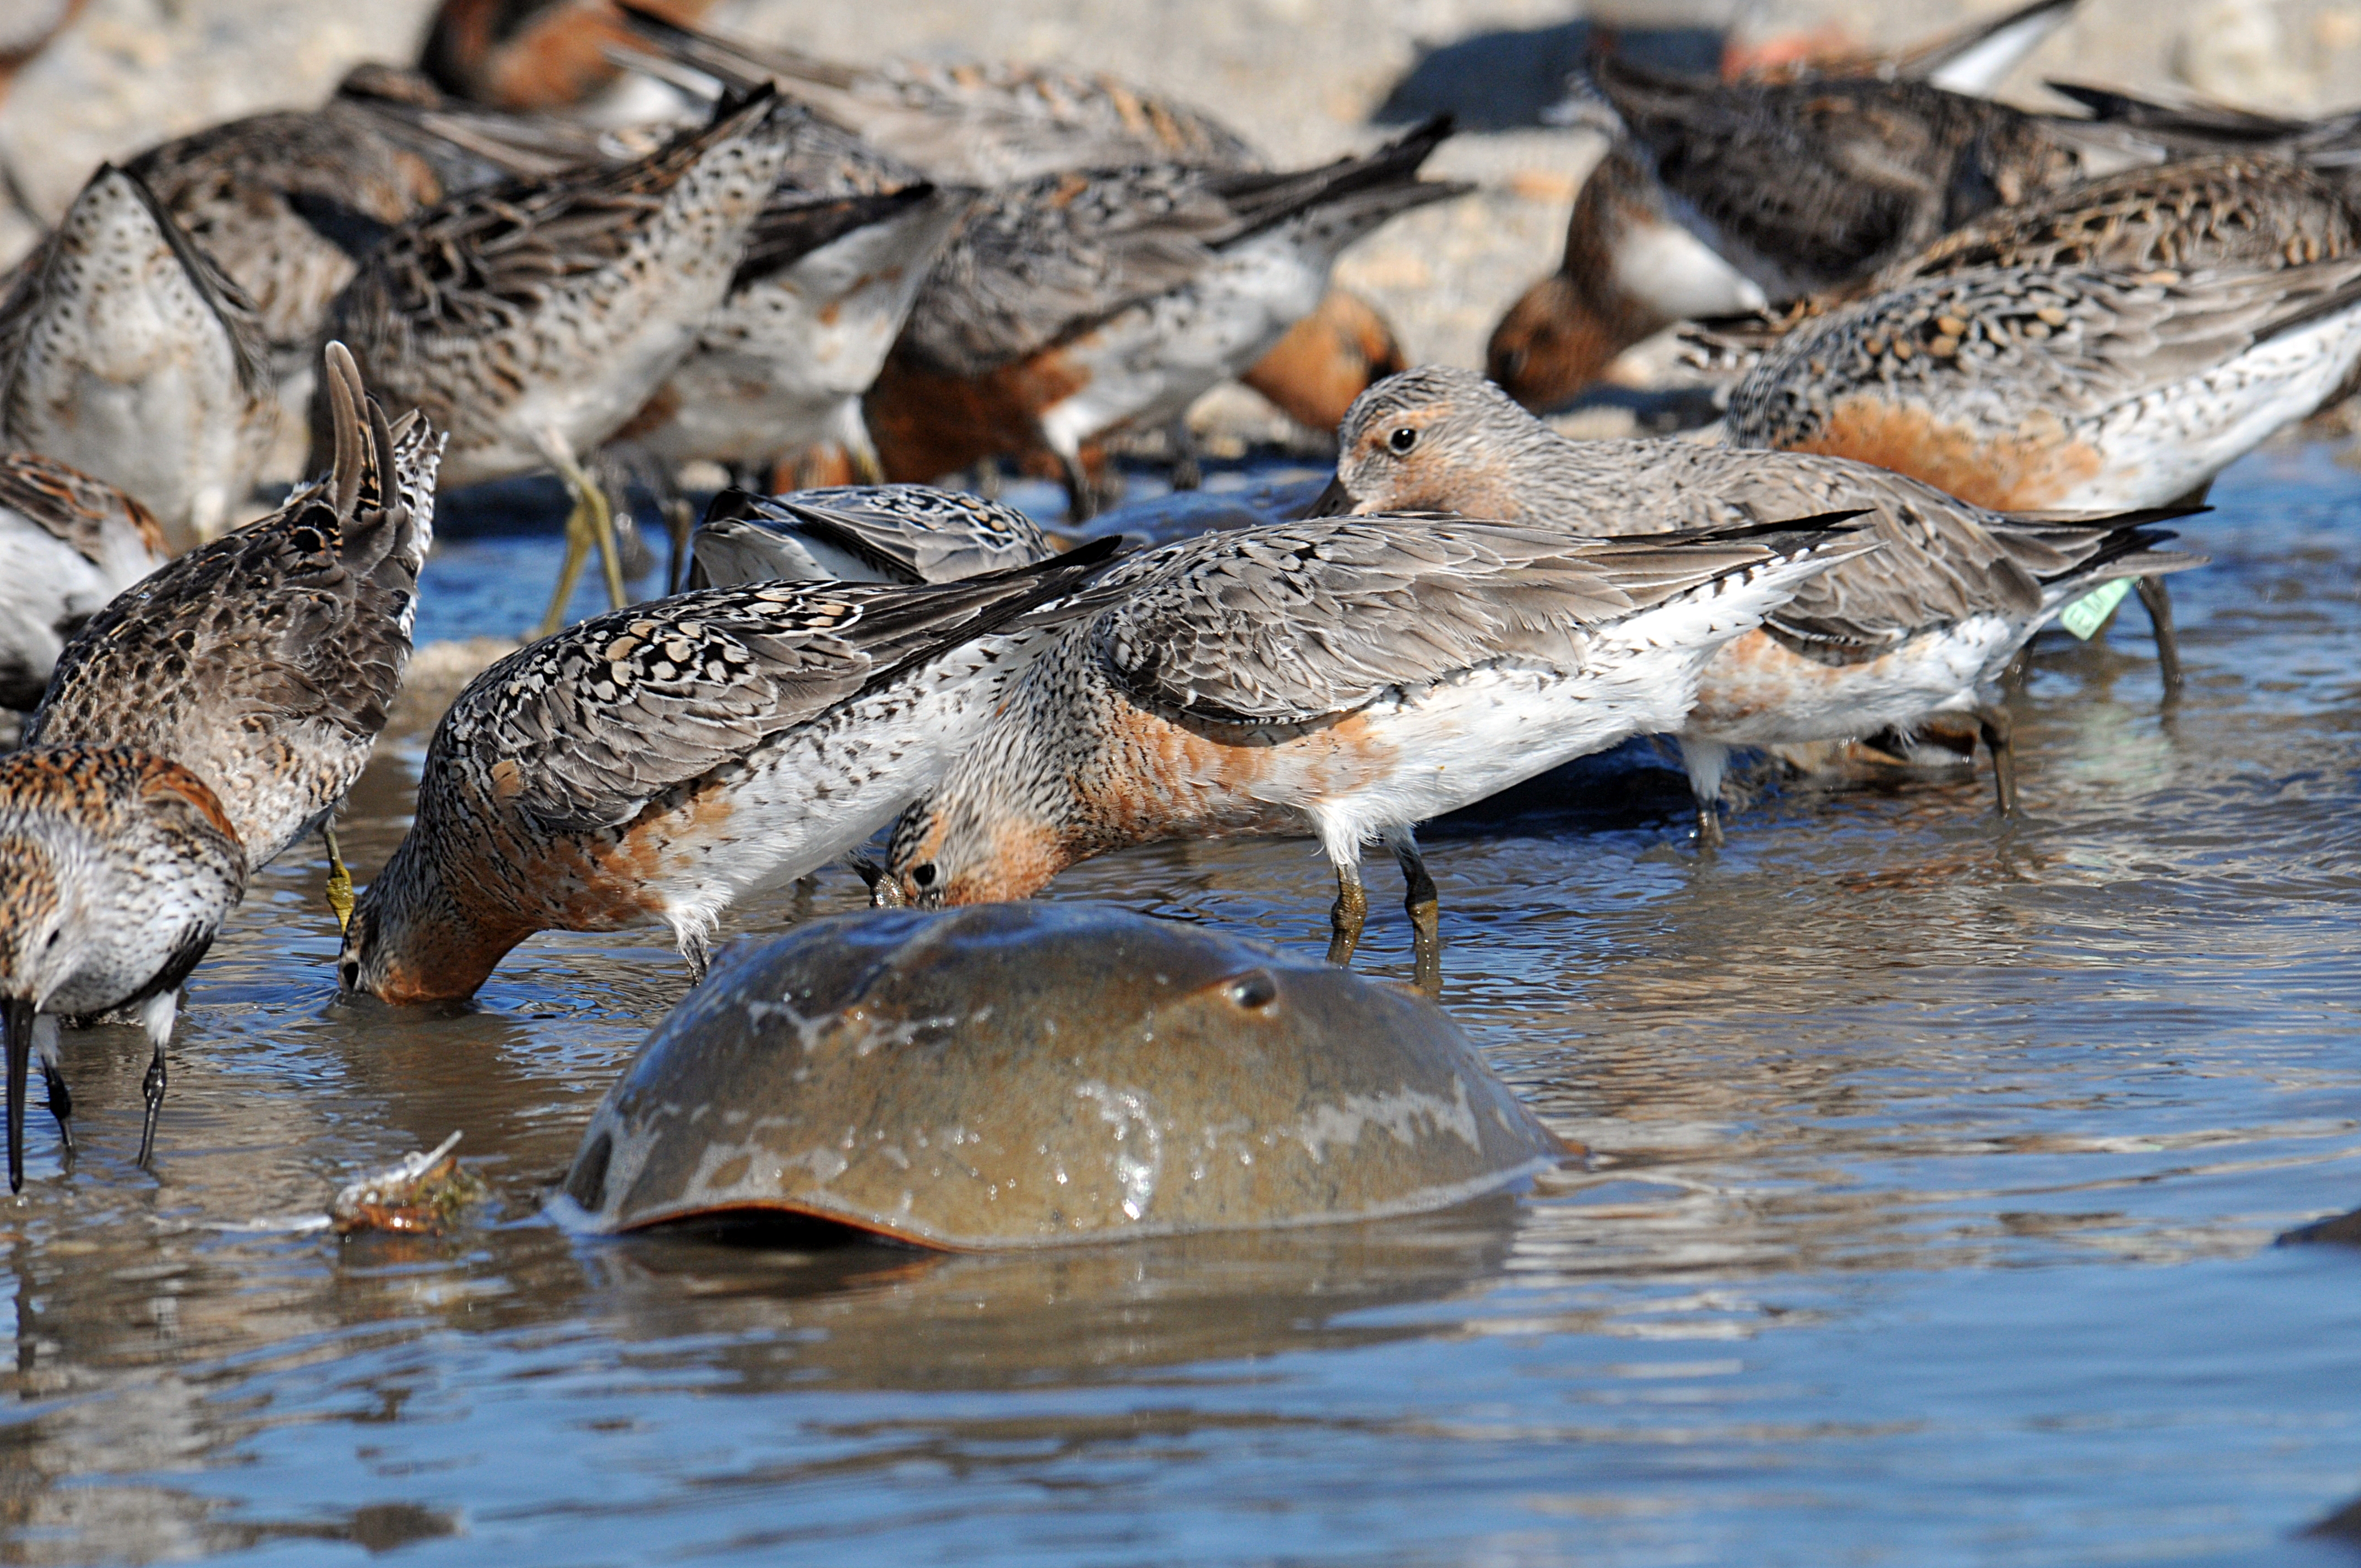 Several gray, brown and white birds--red knots--stand in the edge of the water. The shell of a horseshoe crab is visible in front of them.